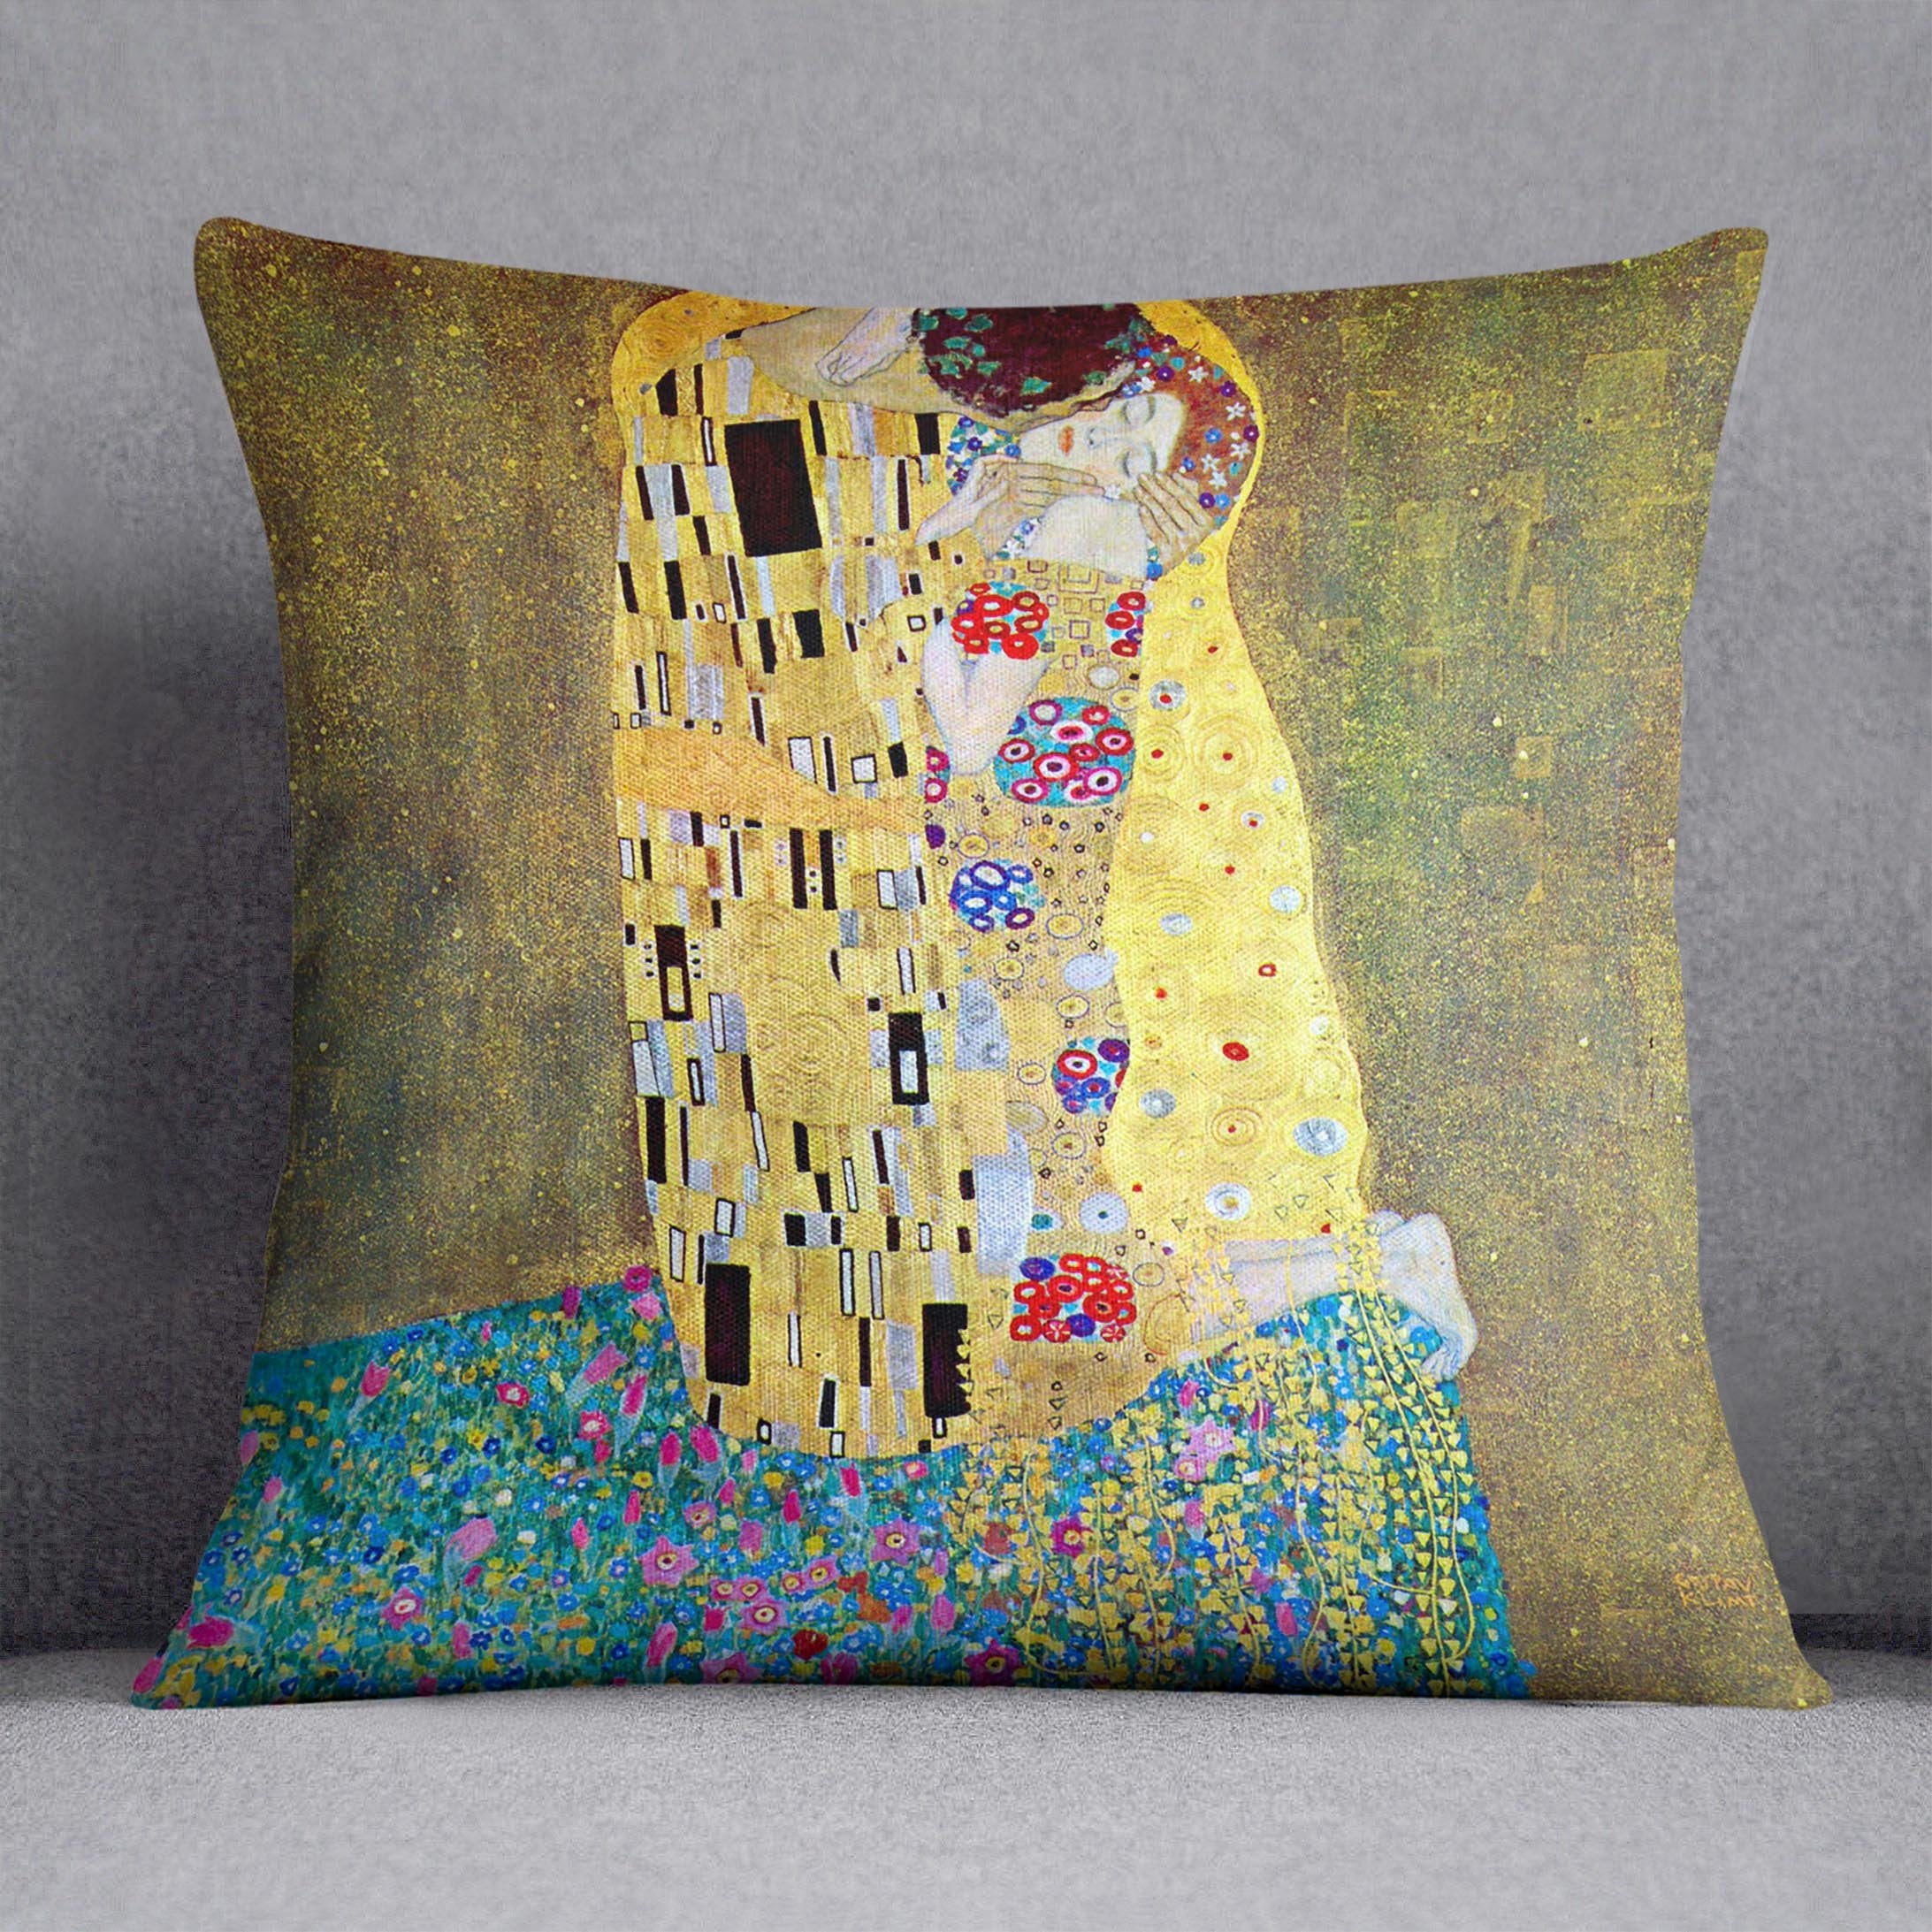 The Kiss 2 by Klimt Throw Pillow